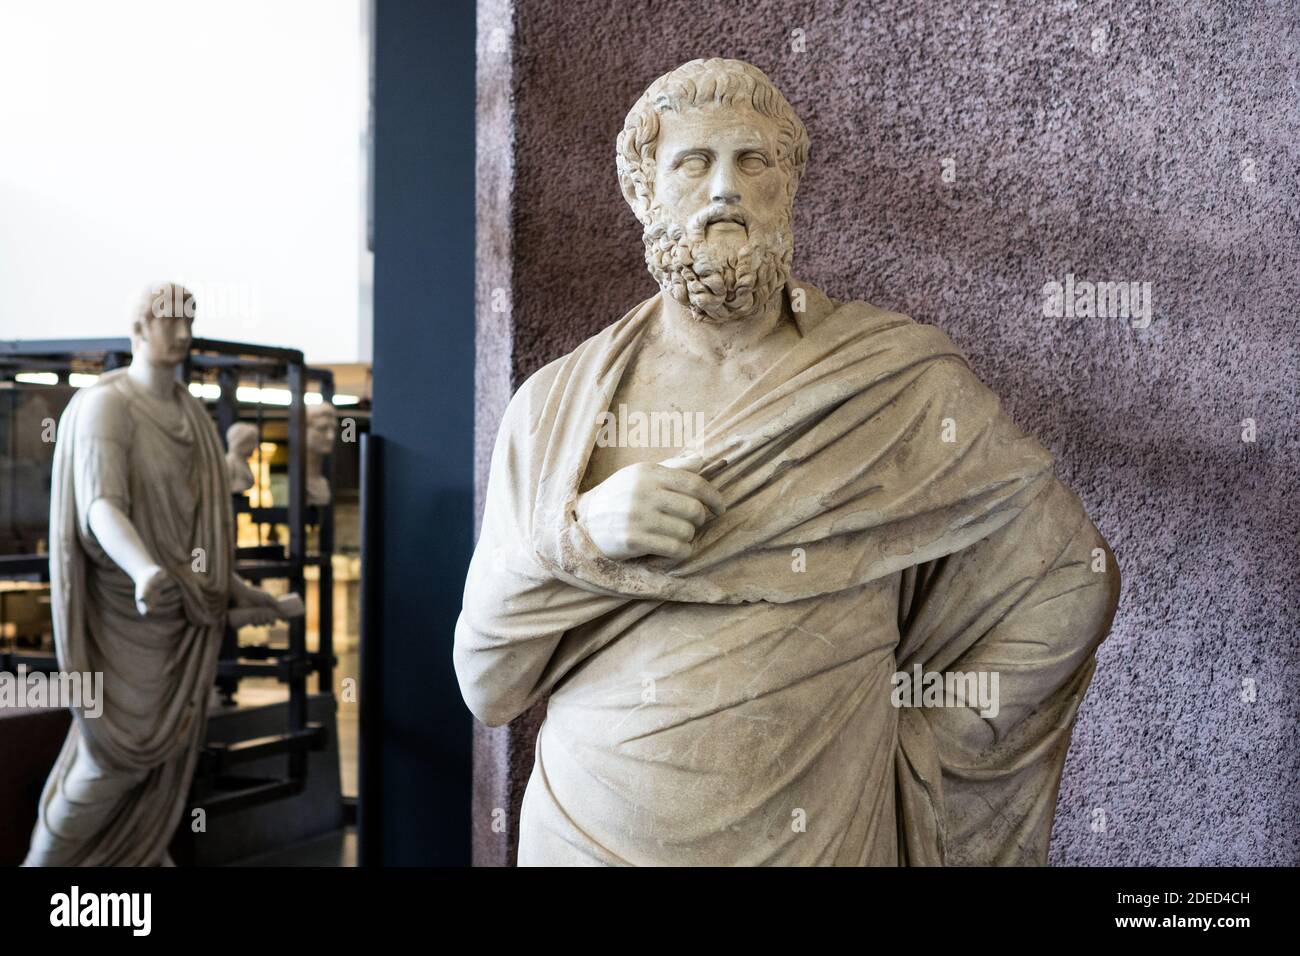 Vatican city, Rome - March 07, 2018: Statue of Sophocles in the Gregoriano Profano museum in Vatican Stock Photo